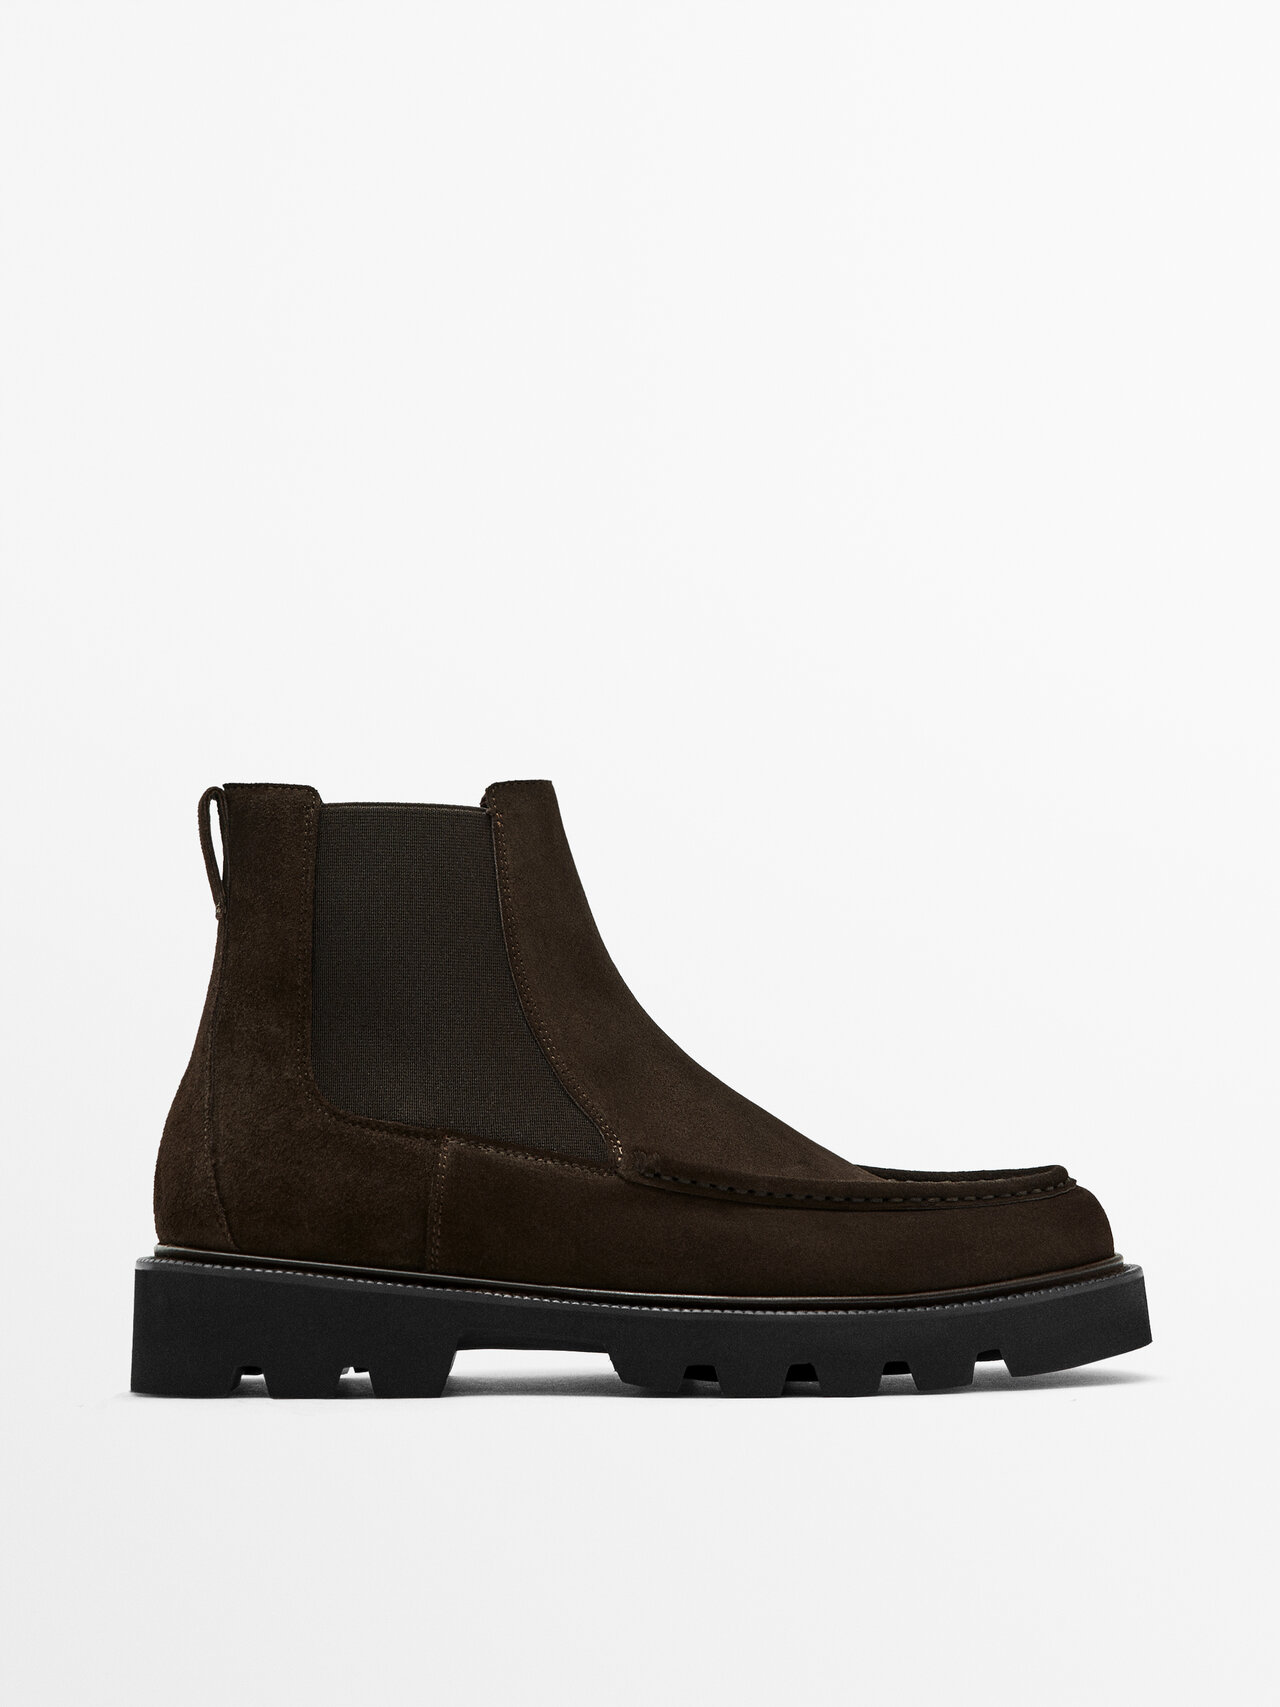 Massimo Dutti Brown Split Suede Chelsea Boots With Moc Toe Detail